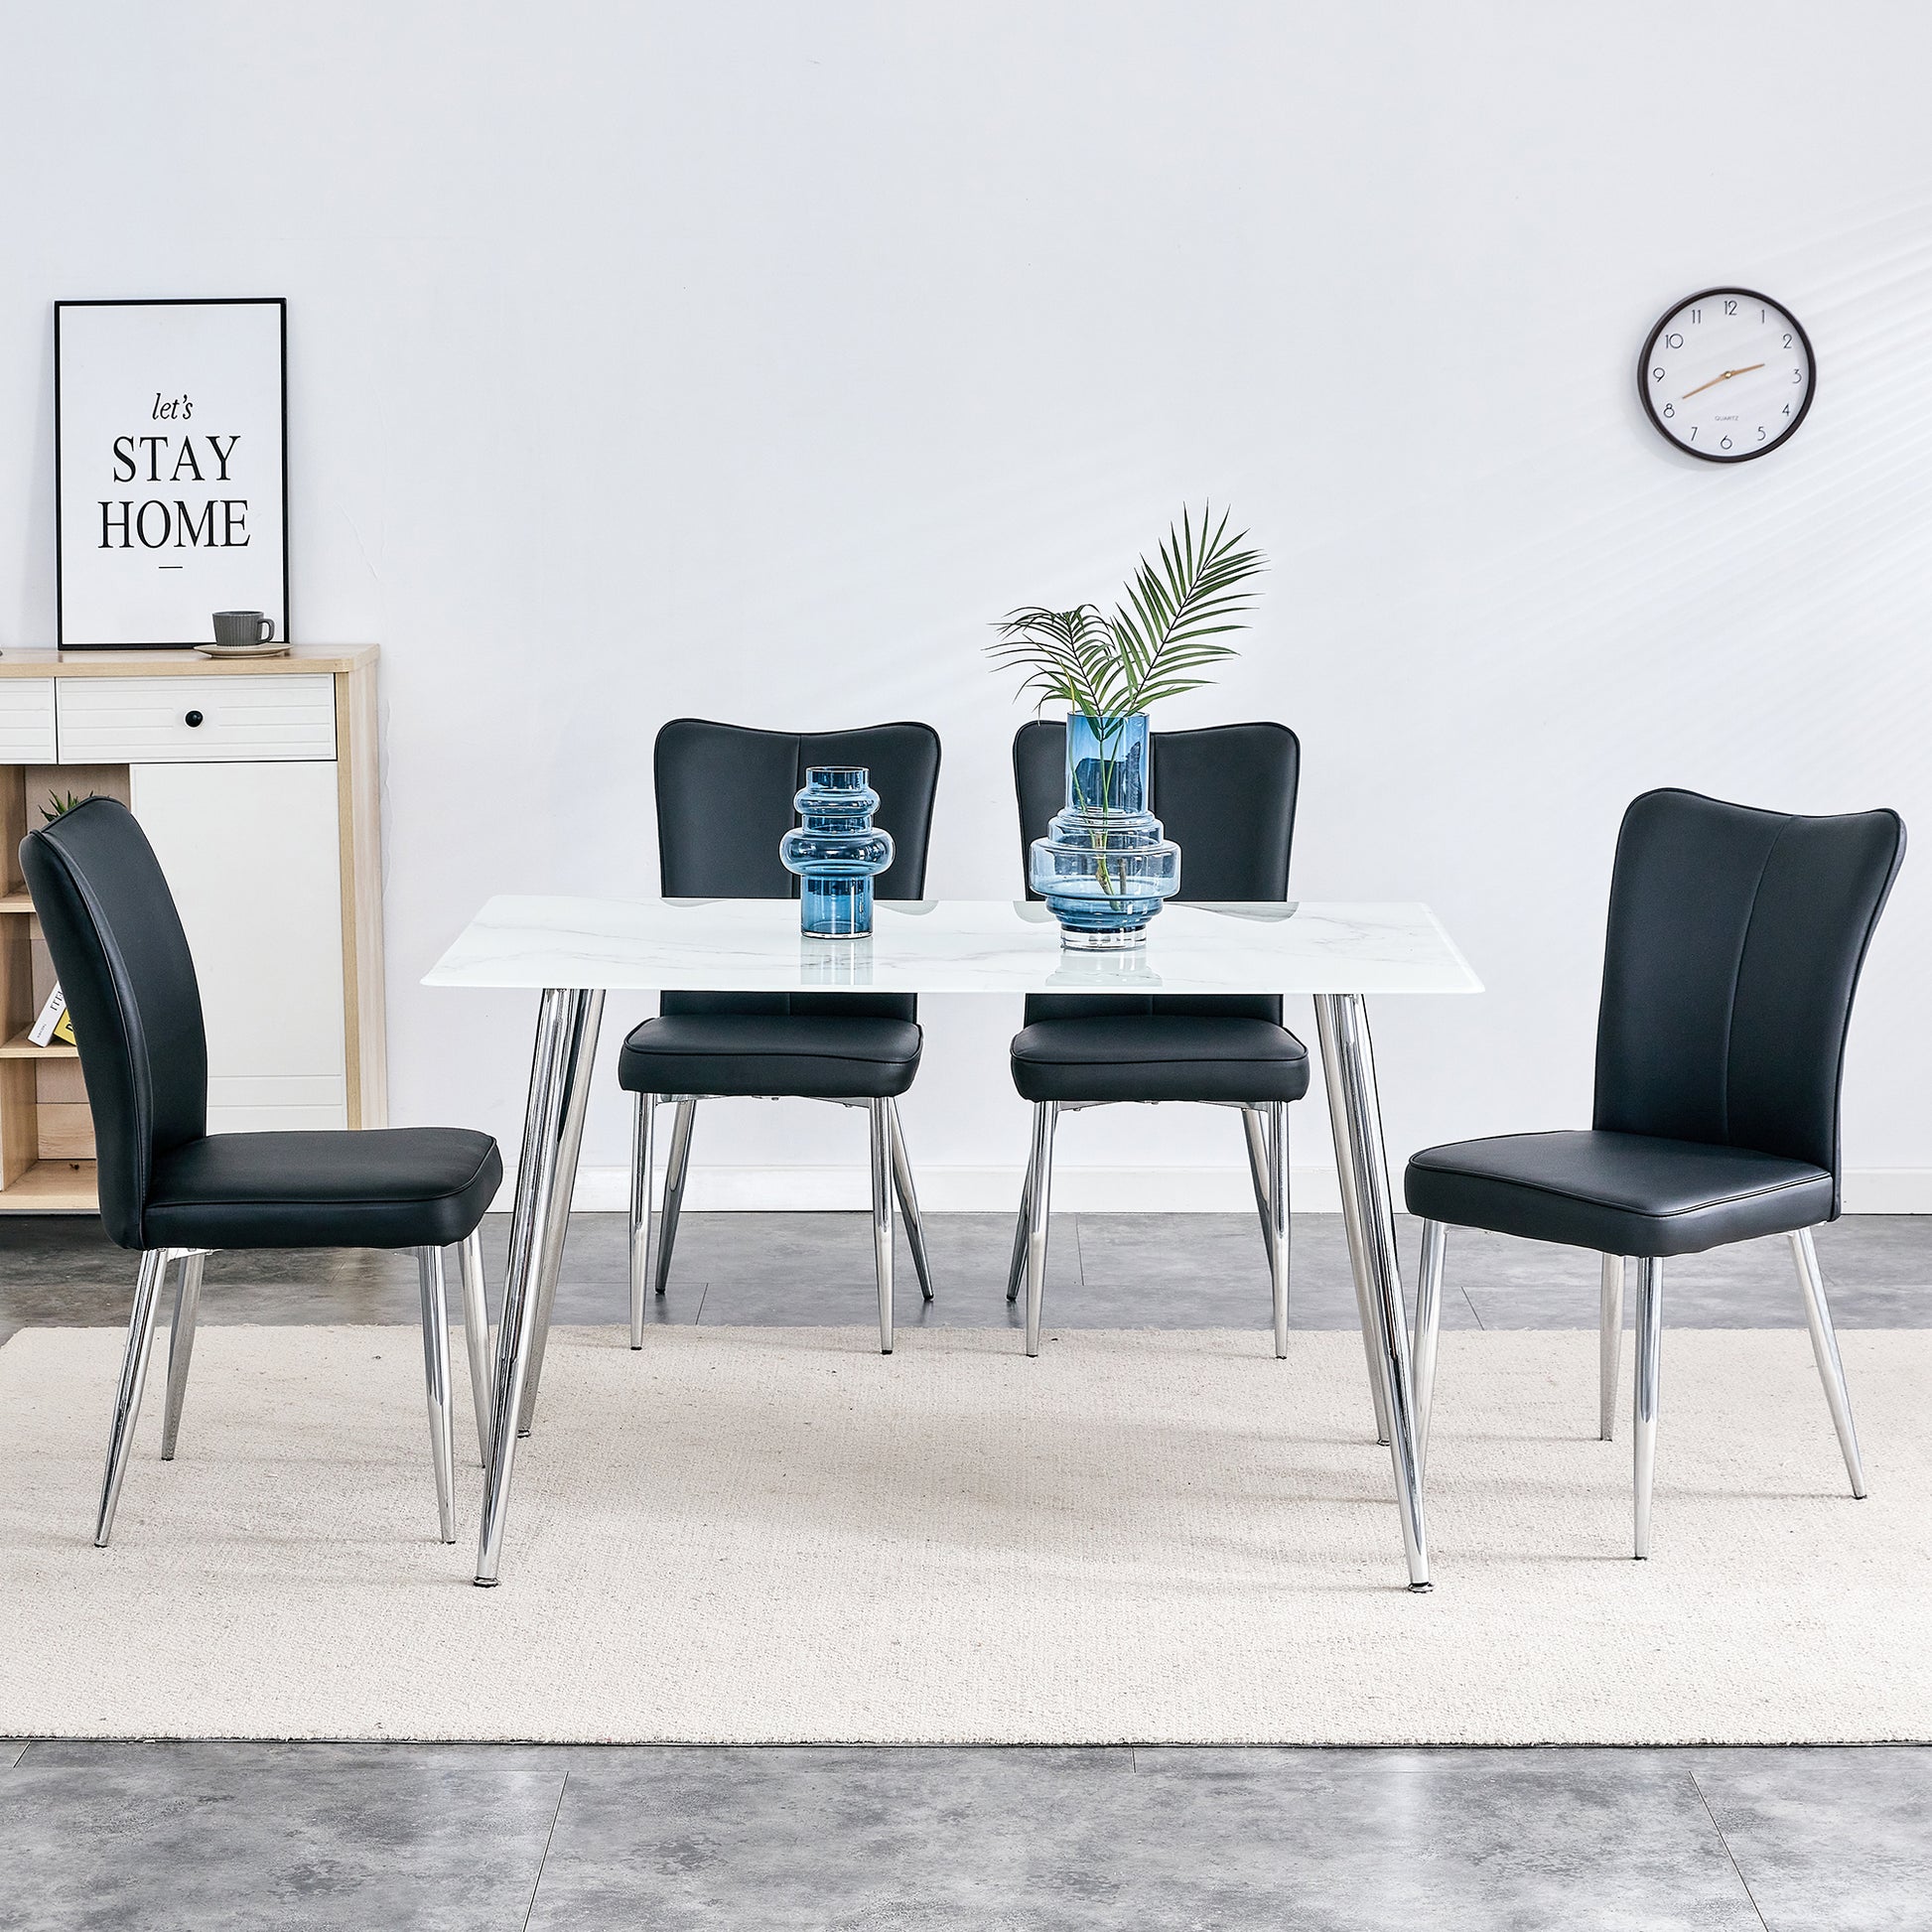 Table and chair set. 1 table with 4 black PU chairs. Modern minimalist rectangular white imitation marble dining table, 0.3 inches thick, with silver metal legs. Paired with 4 PU chairs   DT-1544 008 - Enova Luxe Home Store